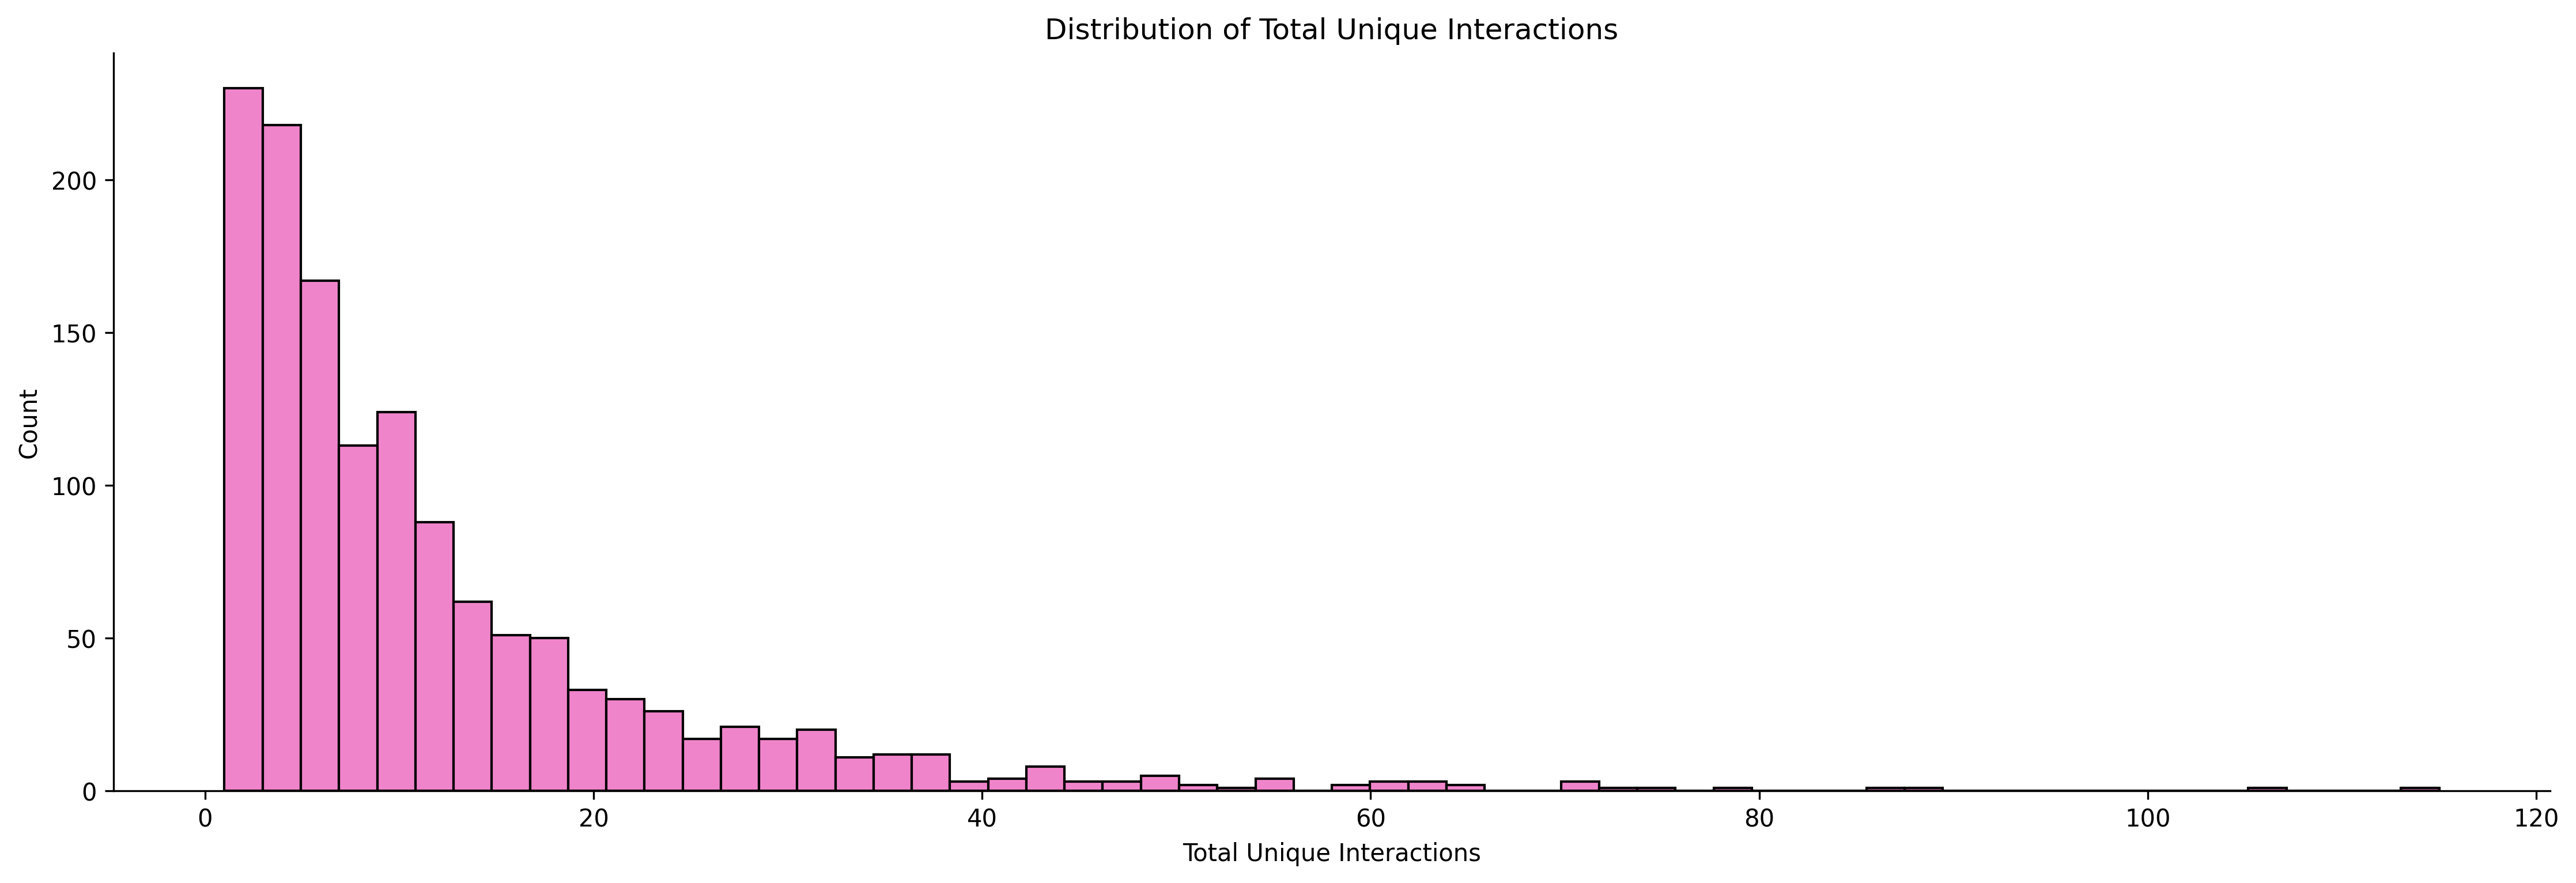 Total Unique Interactions distribution for Flutter-Global users